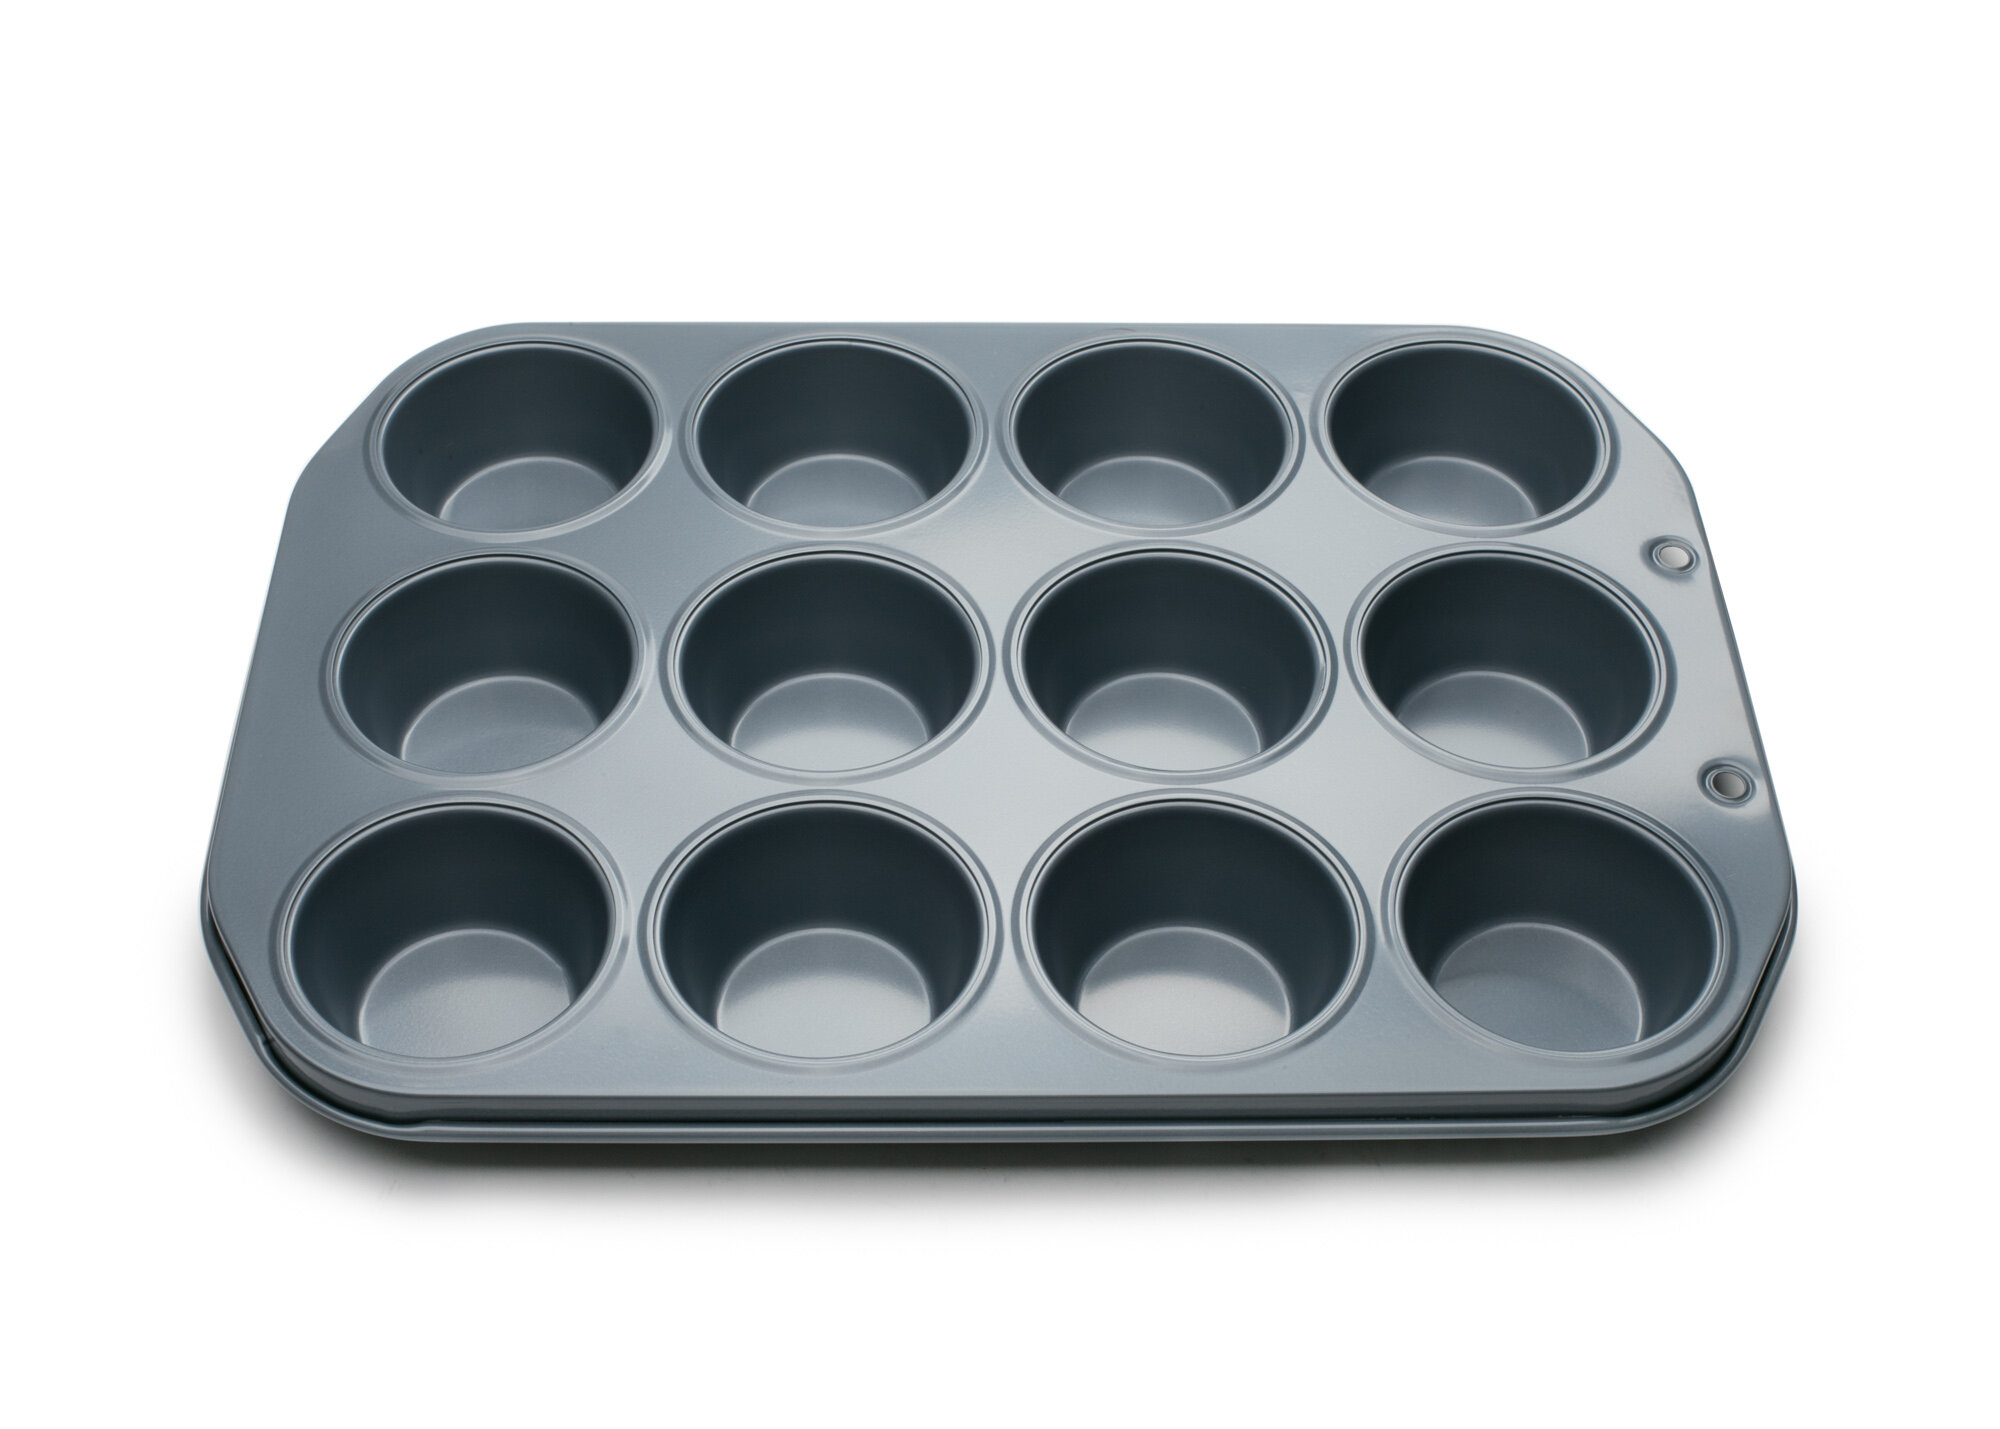 Nordic Ware Muffin Pan, 12 or 24 Cup, Nonstick Finish, Aluminum on